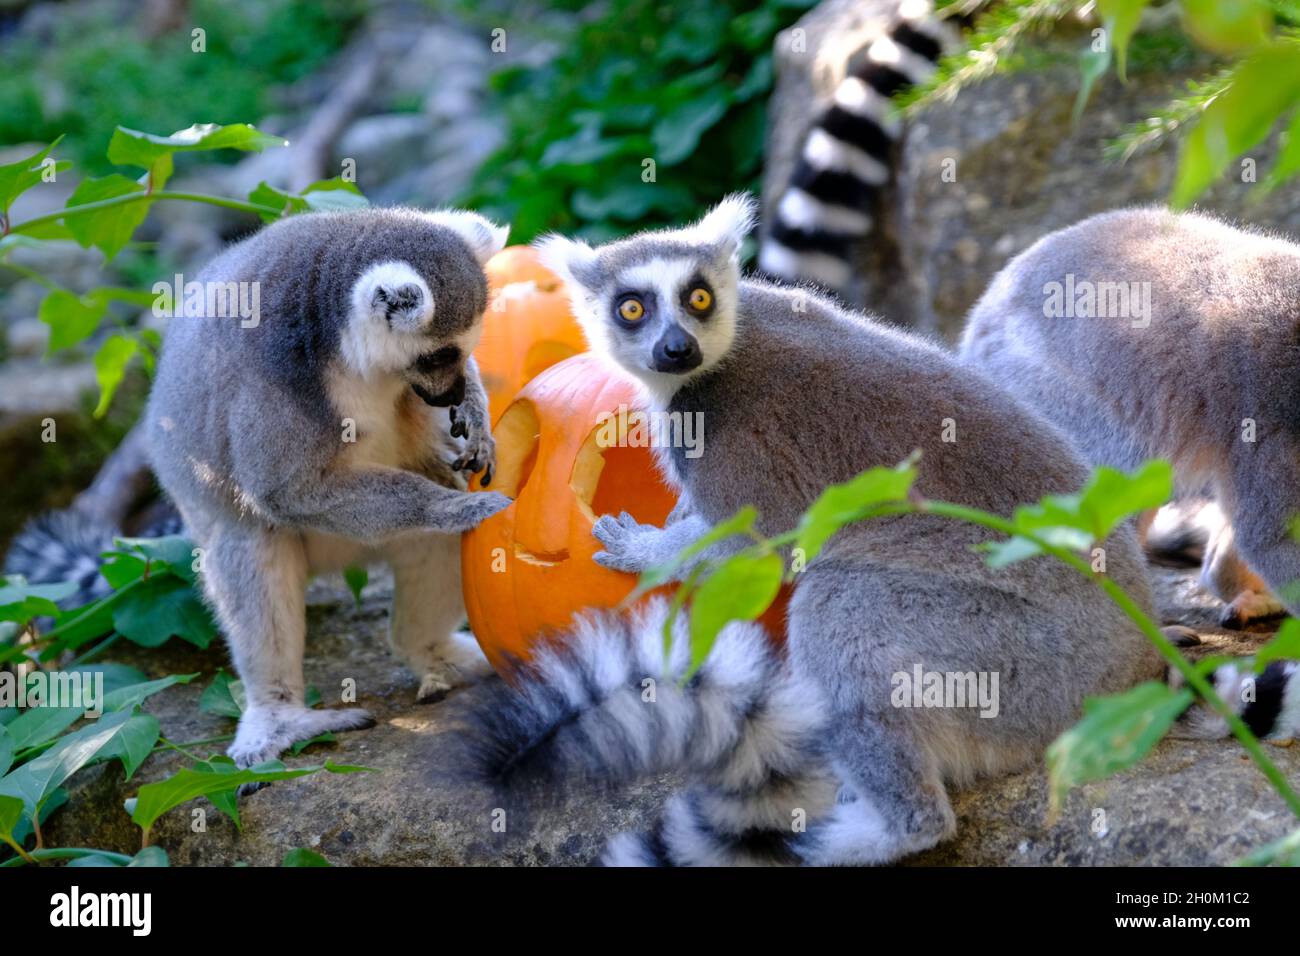 Bristol Zoo, Bristol, UK. 13th Oct, 2021. Ring tailed lemurs enjoying  themselves. Pumpkins abound at Bristol Zoo. Bristol's favourite animals get  a seasonal treat as they explore the Pumpkins looking for treats.